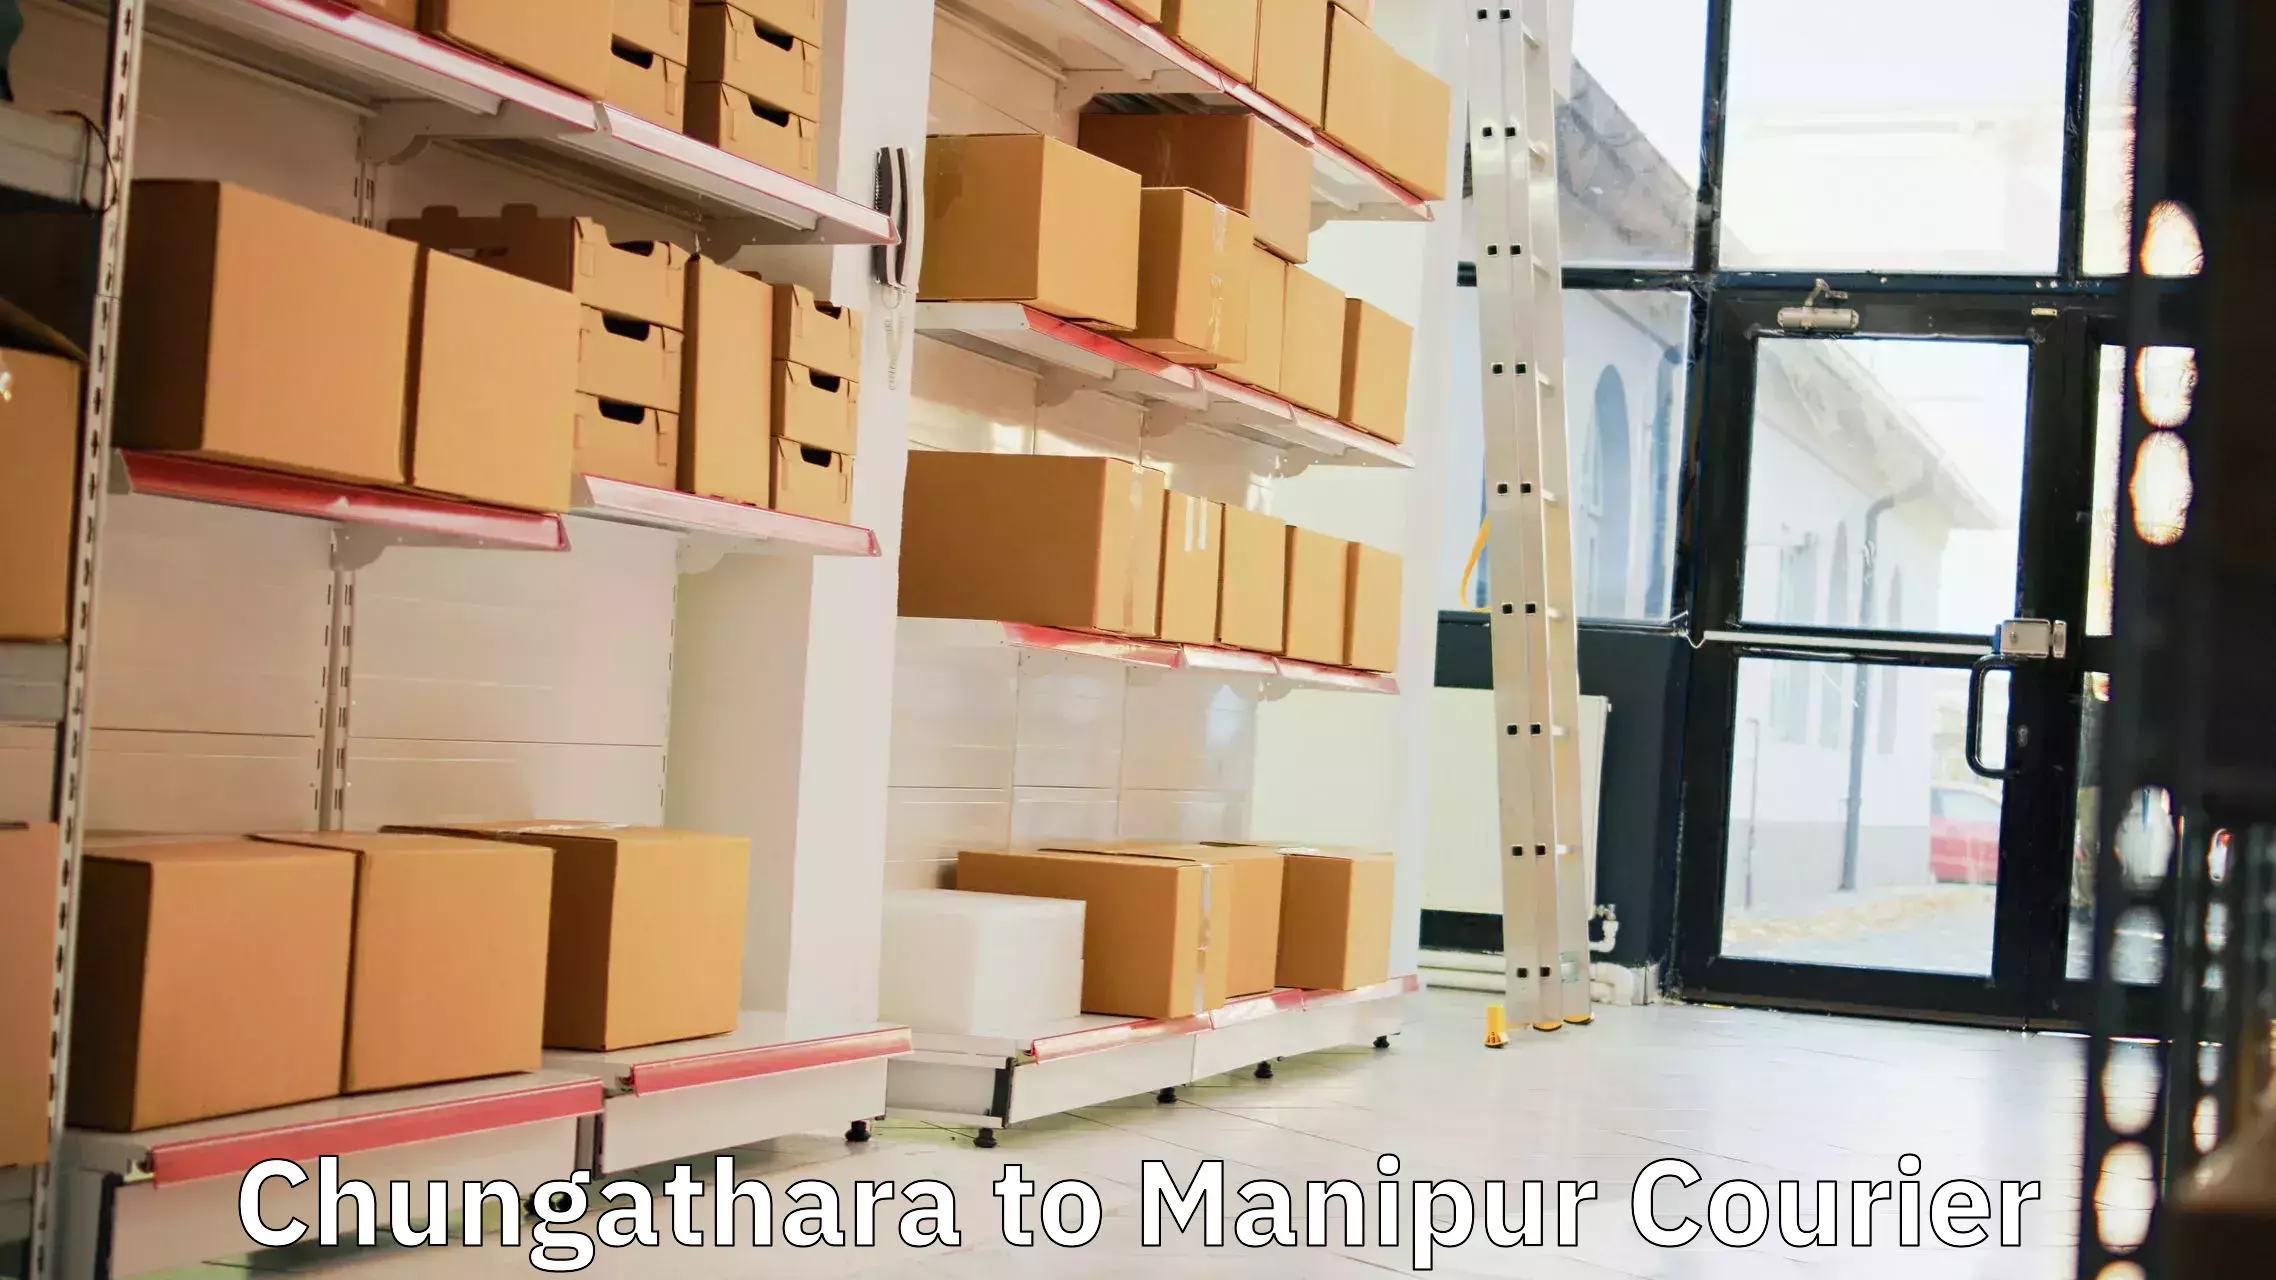 Cargo delivery service Chungathara to Tamenglong